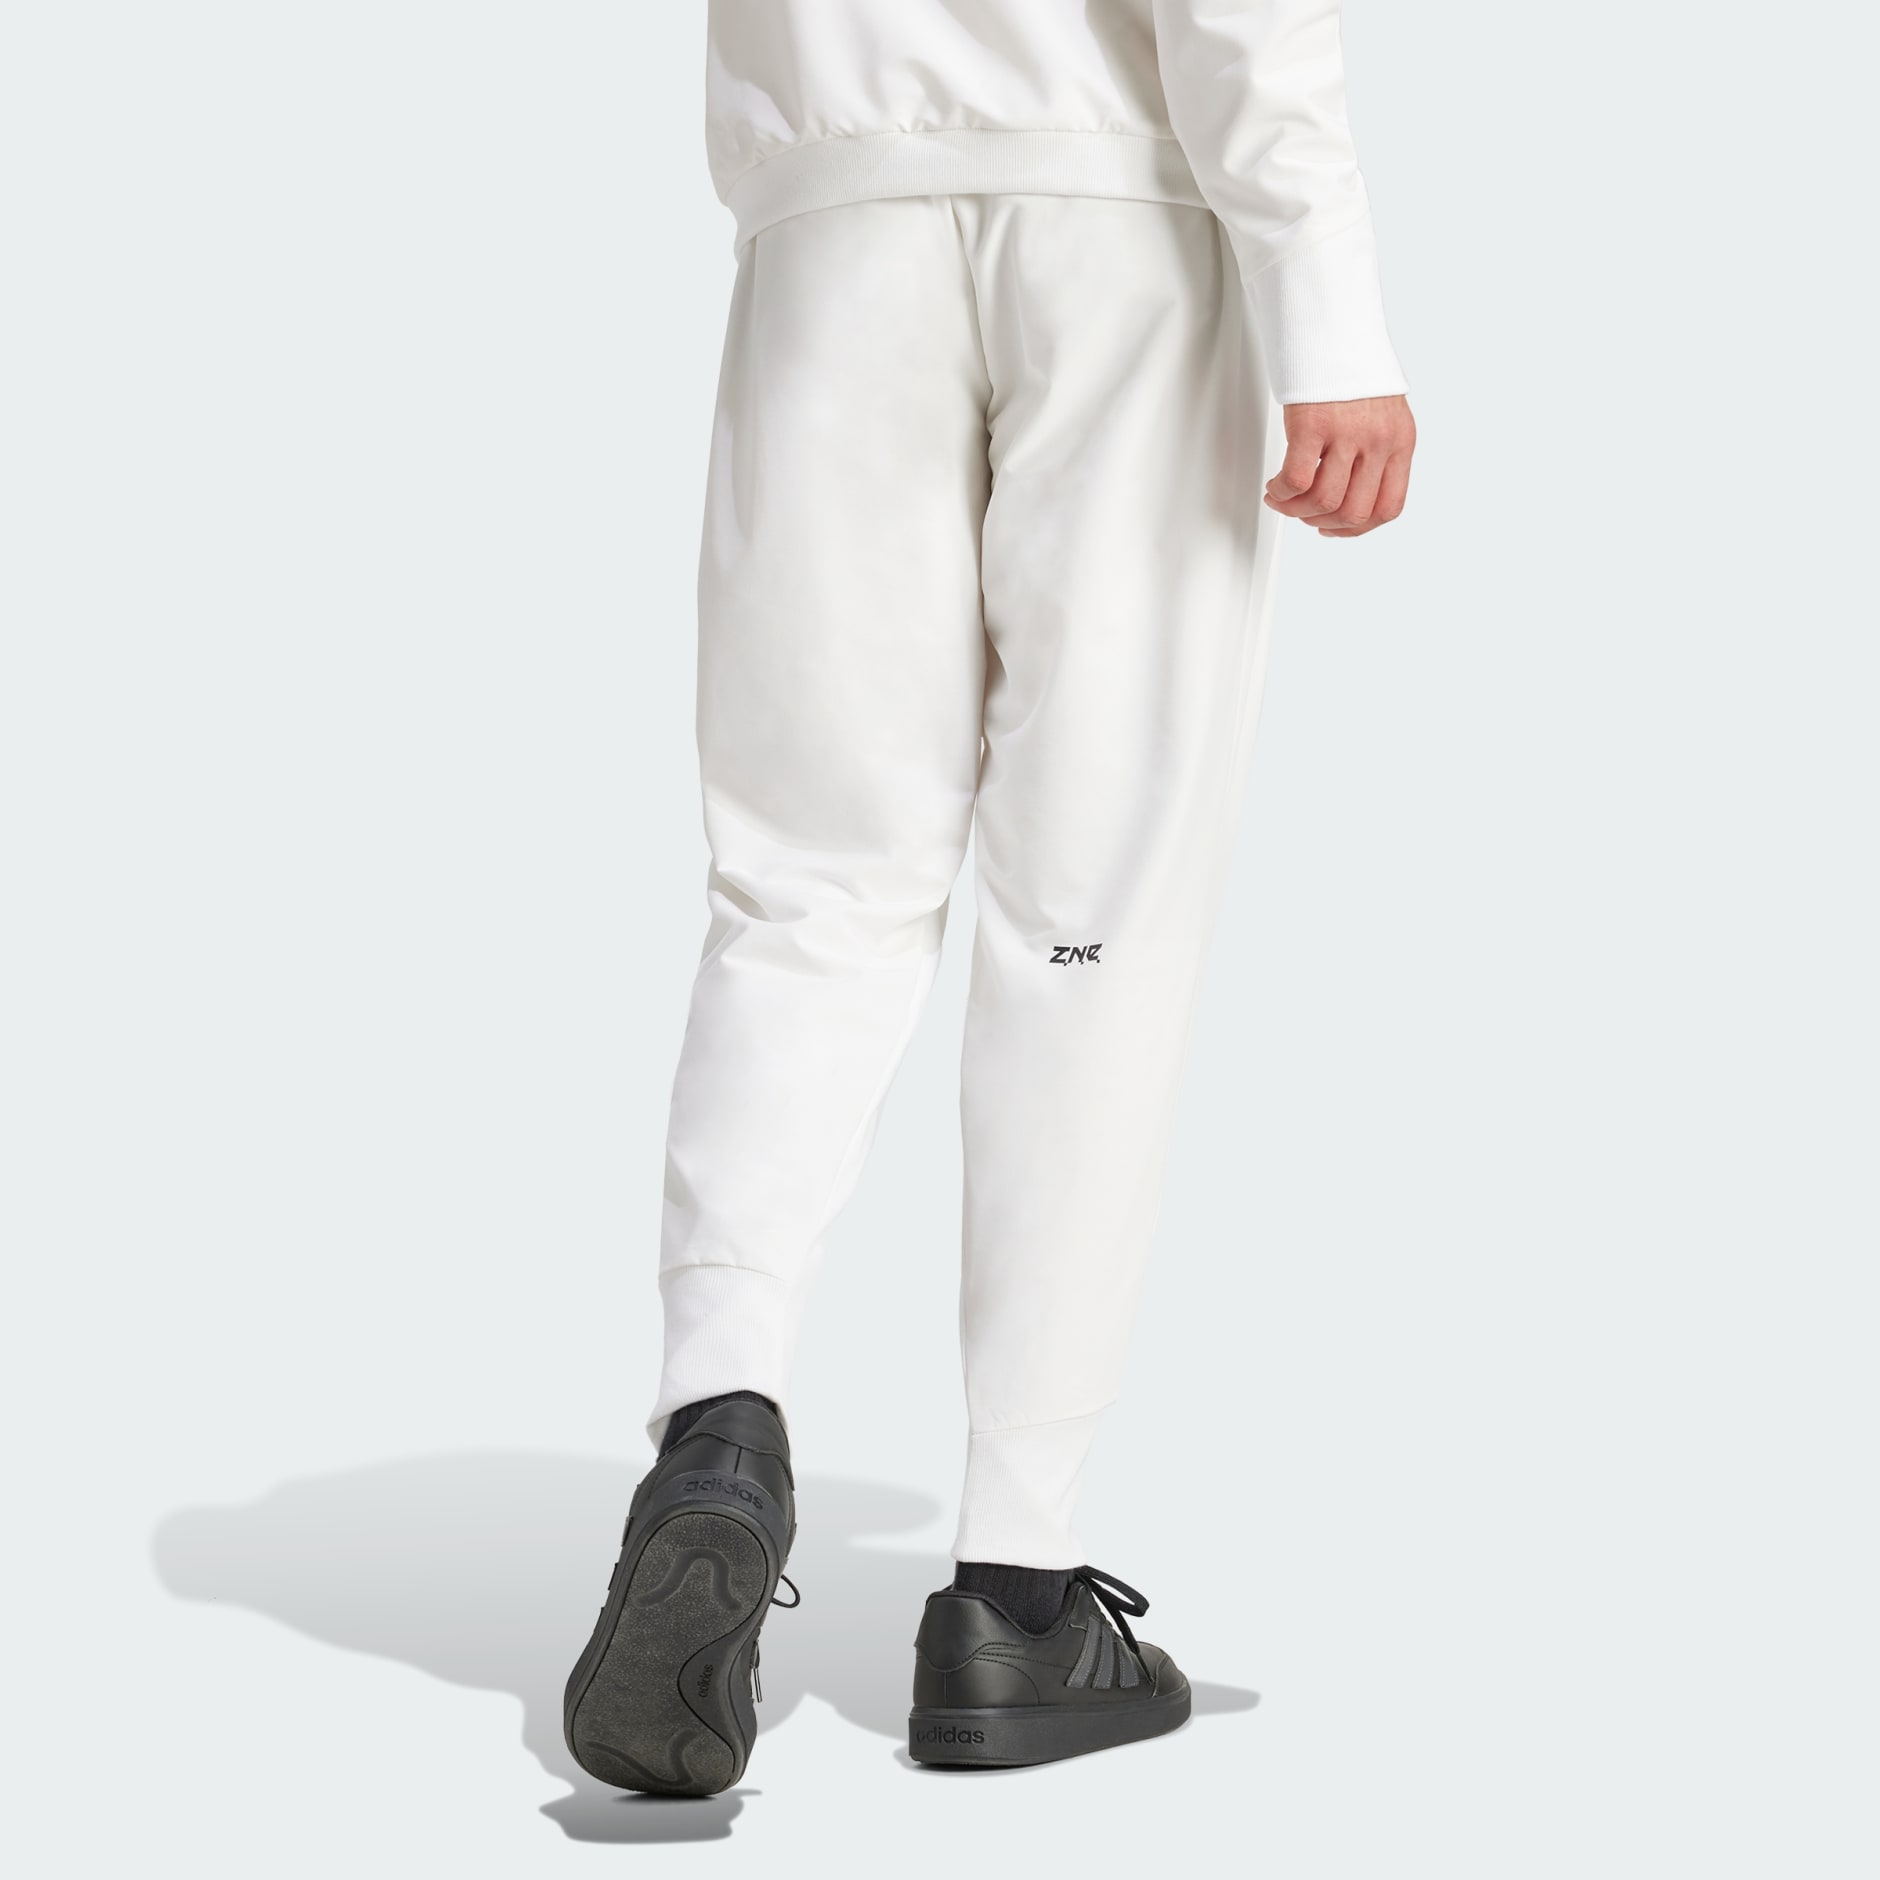 Clothing - Z.N.E. Woven Pants - White | adidas South Africa